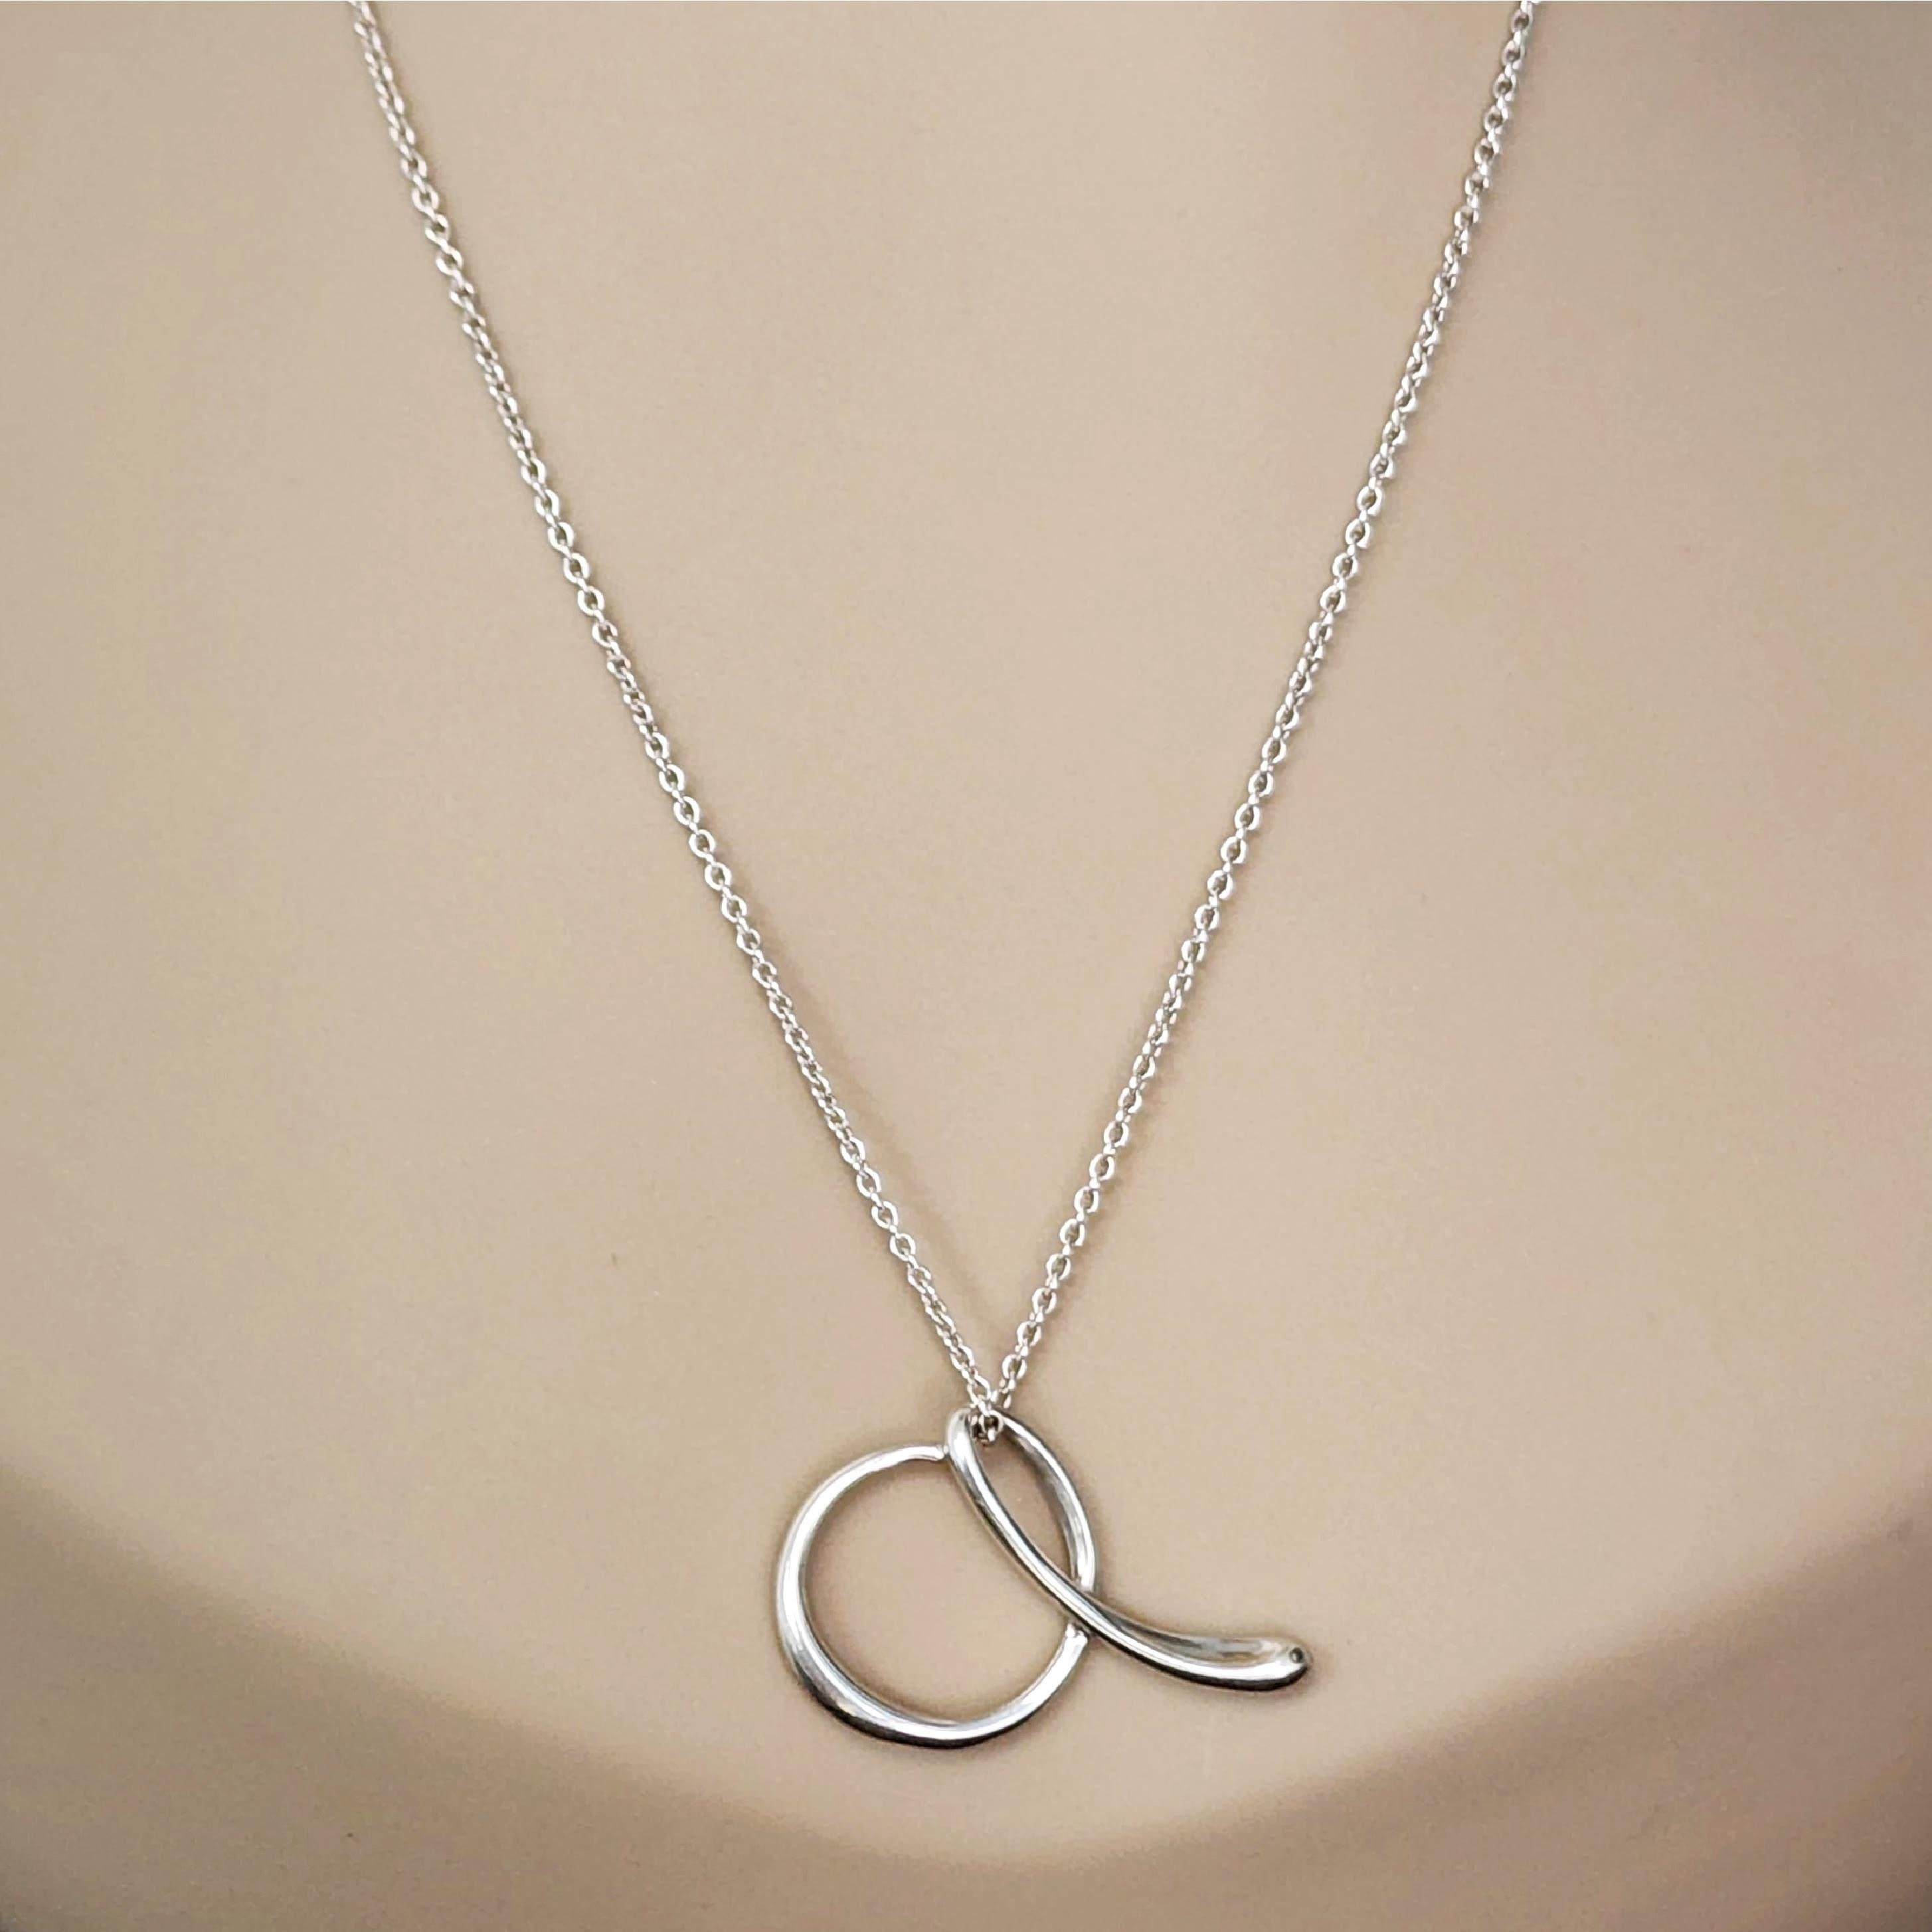 Tiffany & Co sterling silver letter A charm pendant with chain necklace by Elsa Peretti.

An authentic Tiffany & Co necklace featuring a script letter A pendant from Elsa Peretti's Alphabet collection, on a delicate chain. Does not include Tiffany &